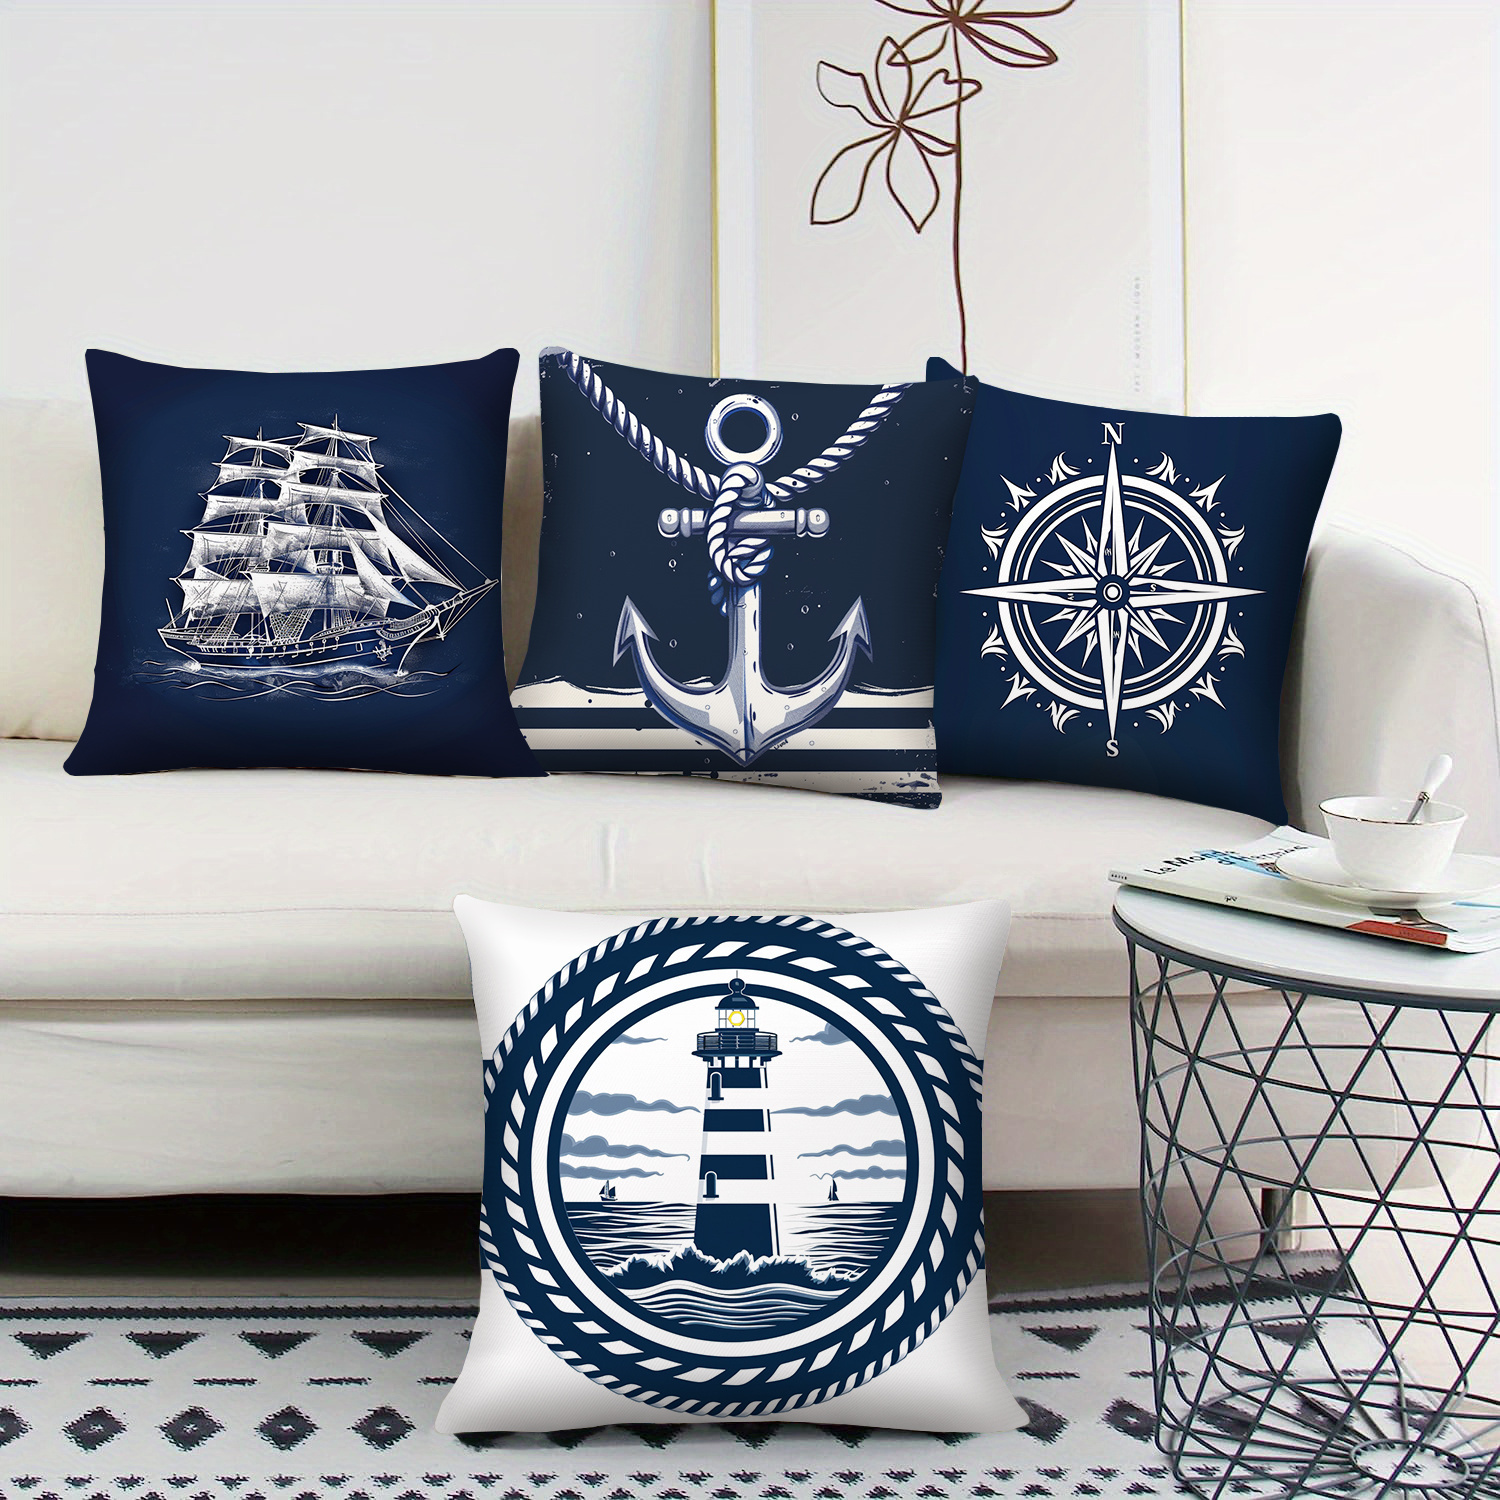 

4-piece Nautical Navy Blue Throw Pillow Covers Set - 18x18 Inch, Coastal Anchor & Lighthouse Designs, Durable Polyester, Zip Closure, Machine Washable - Perfect For Sofa, Couch, And Bedroom Decor